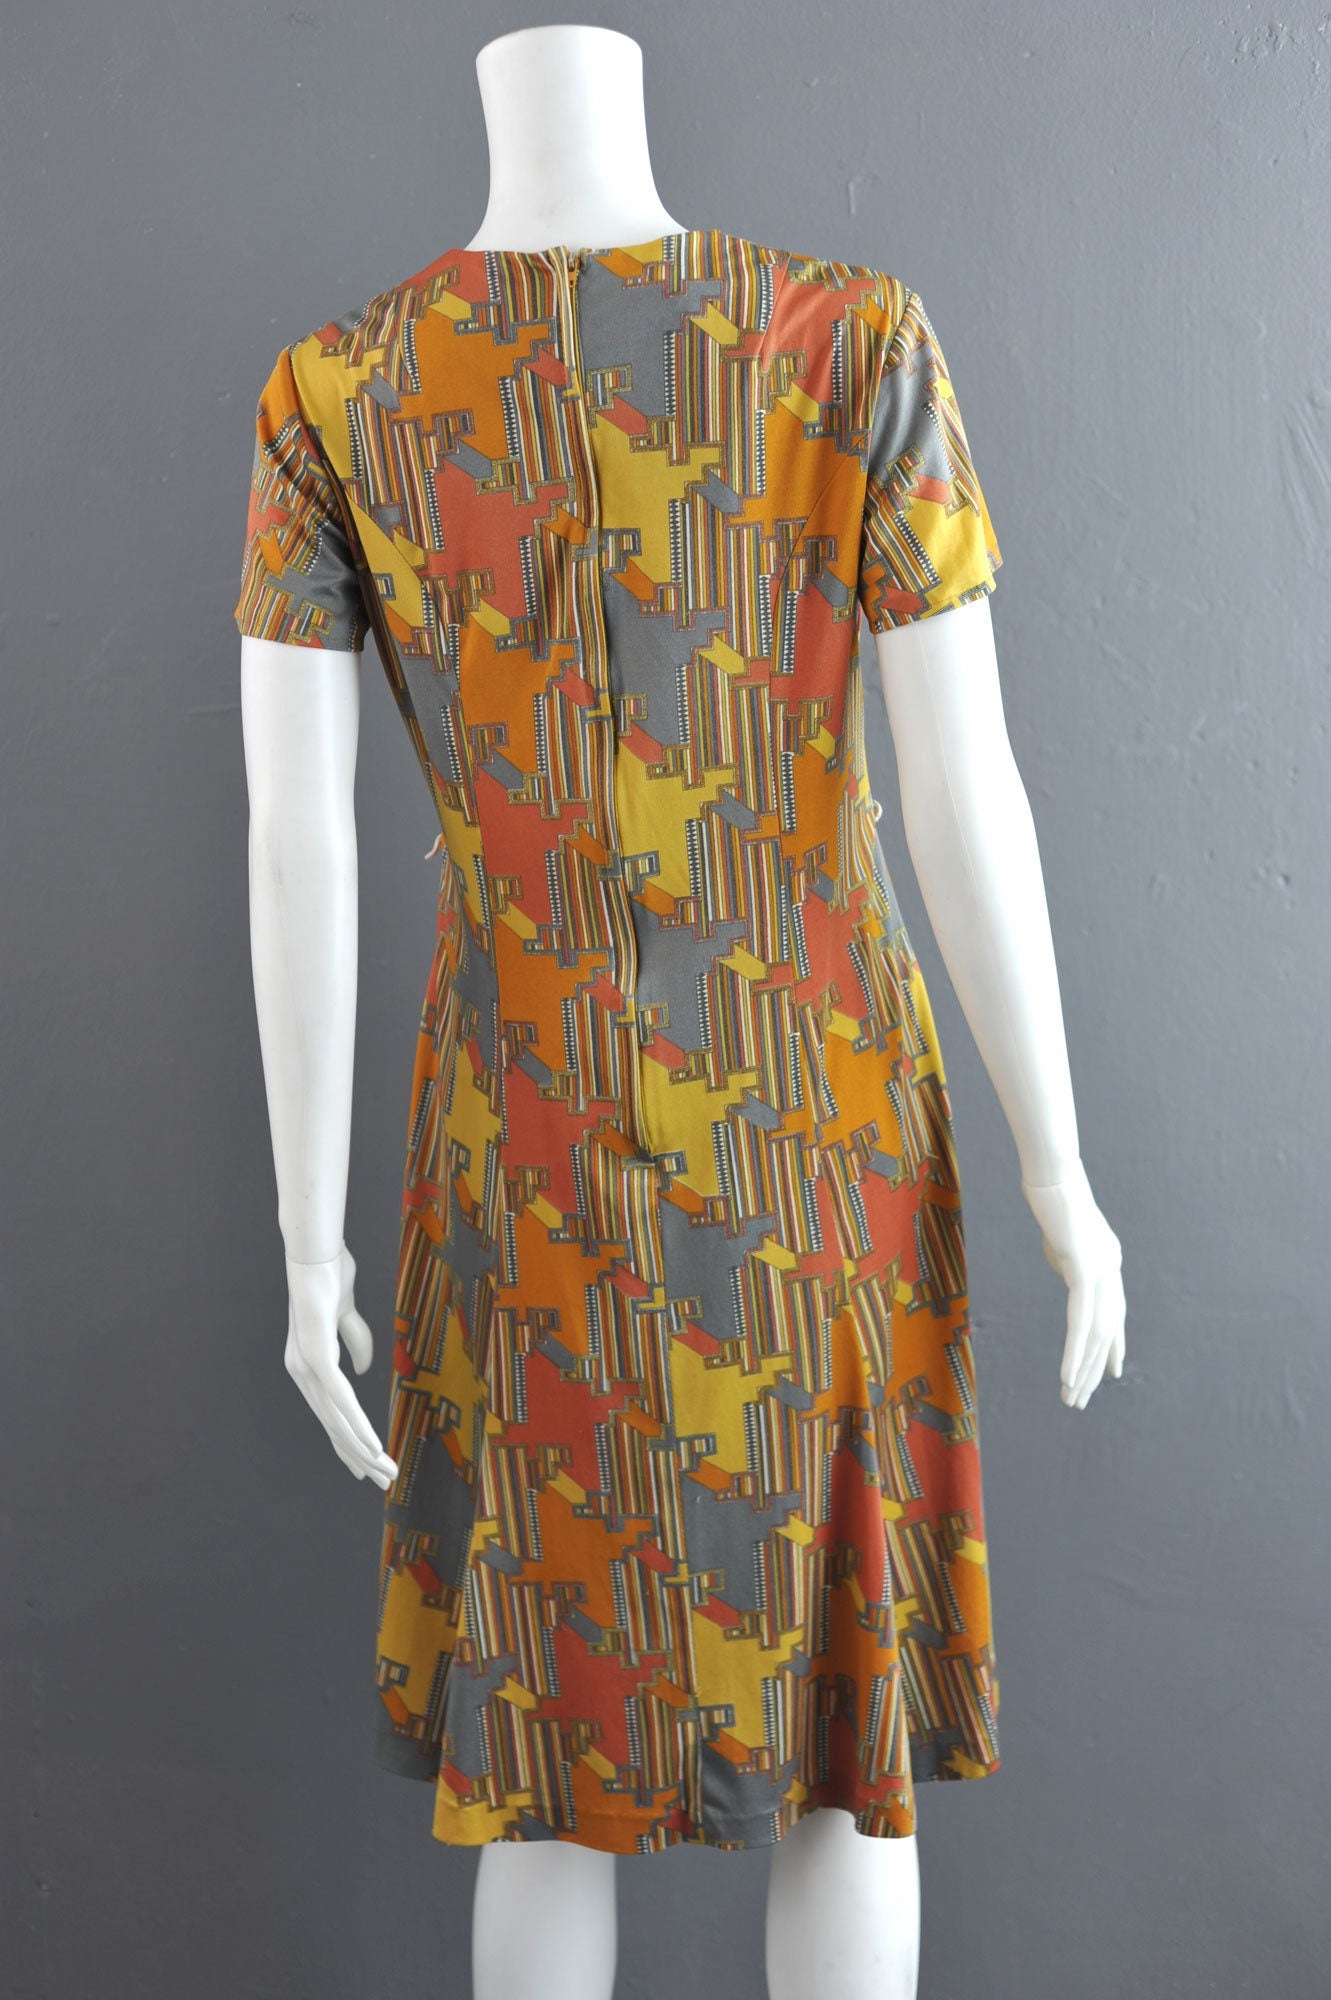 70s Psychedelic Houndstooth Dress, Abstract Eastex Day Dress, Size Medium